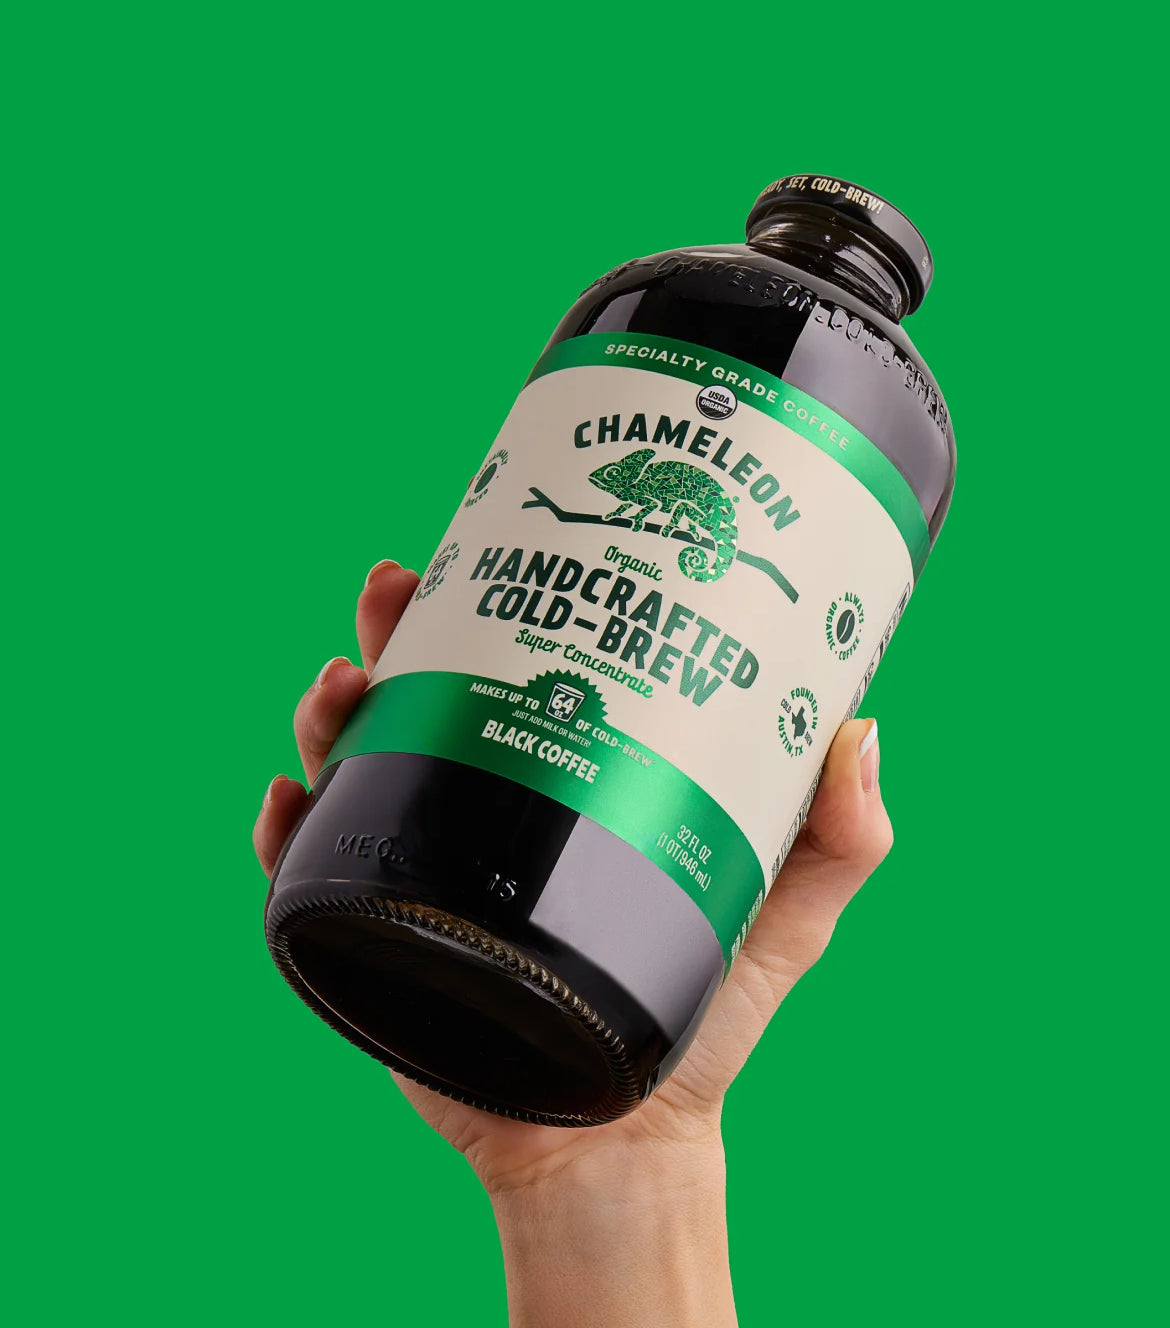 A hand holding a bottle of Chameleon organic cold brew concentrate against a green background.